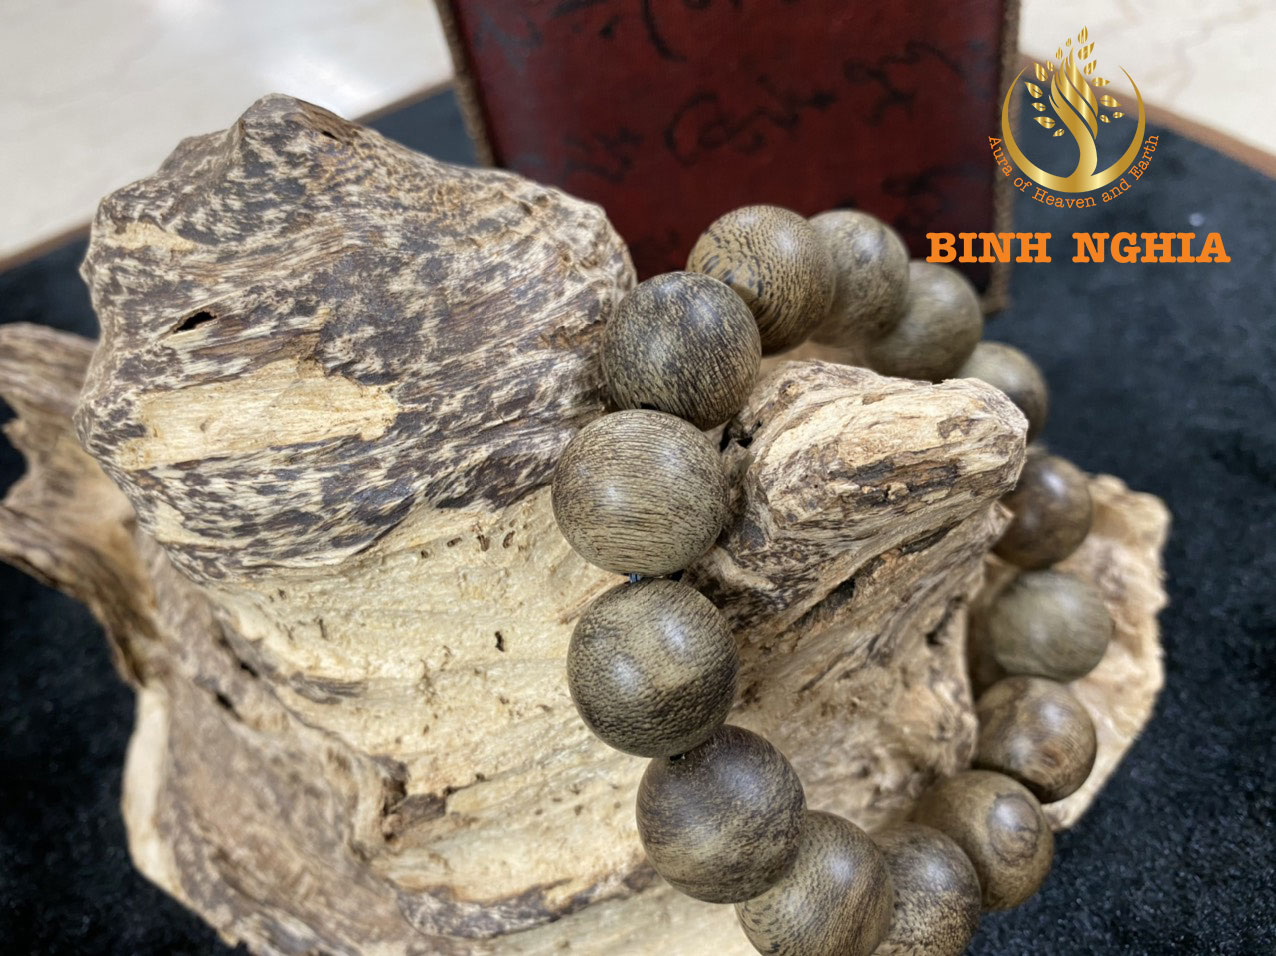 Agarwood: The Sacred Scent Uniting Cultures - Symbolism and Rituals Explored!